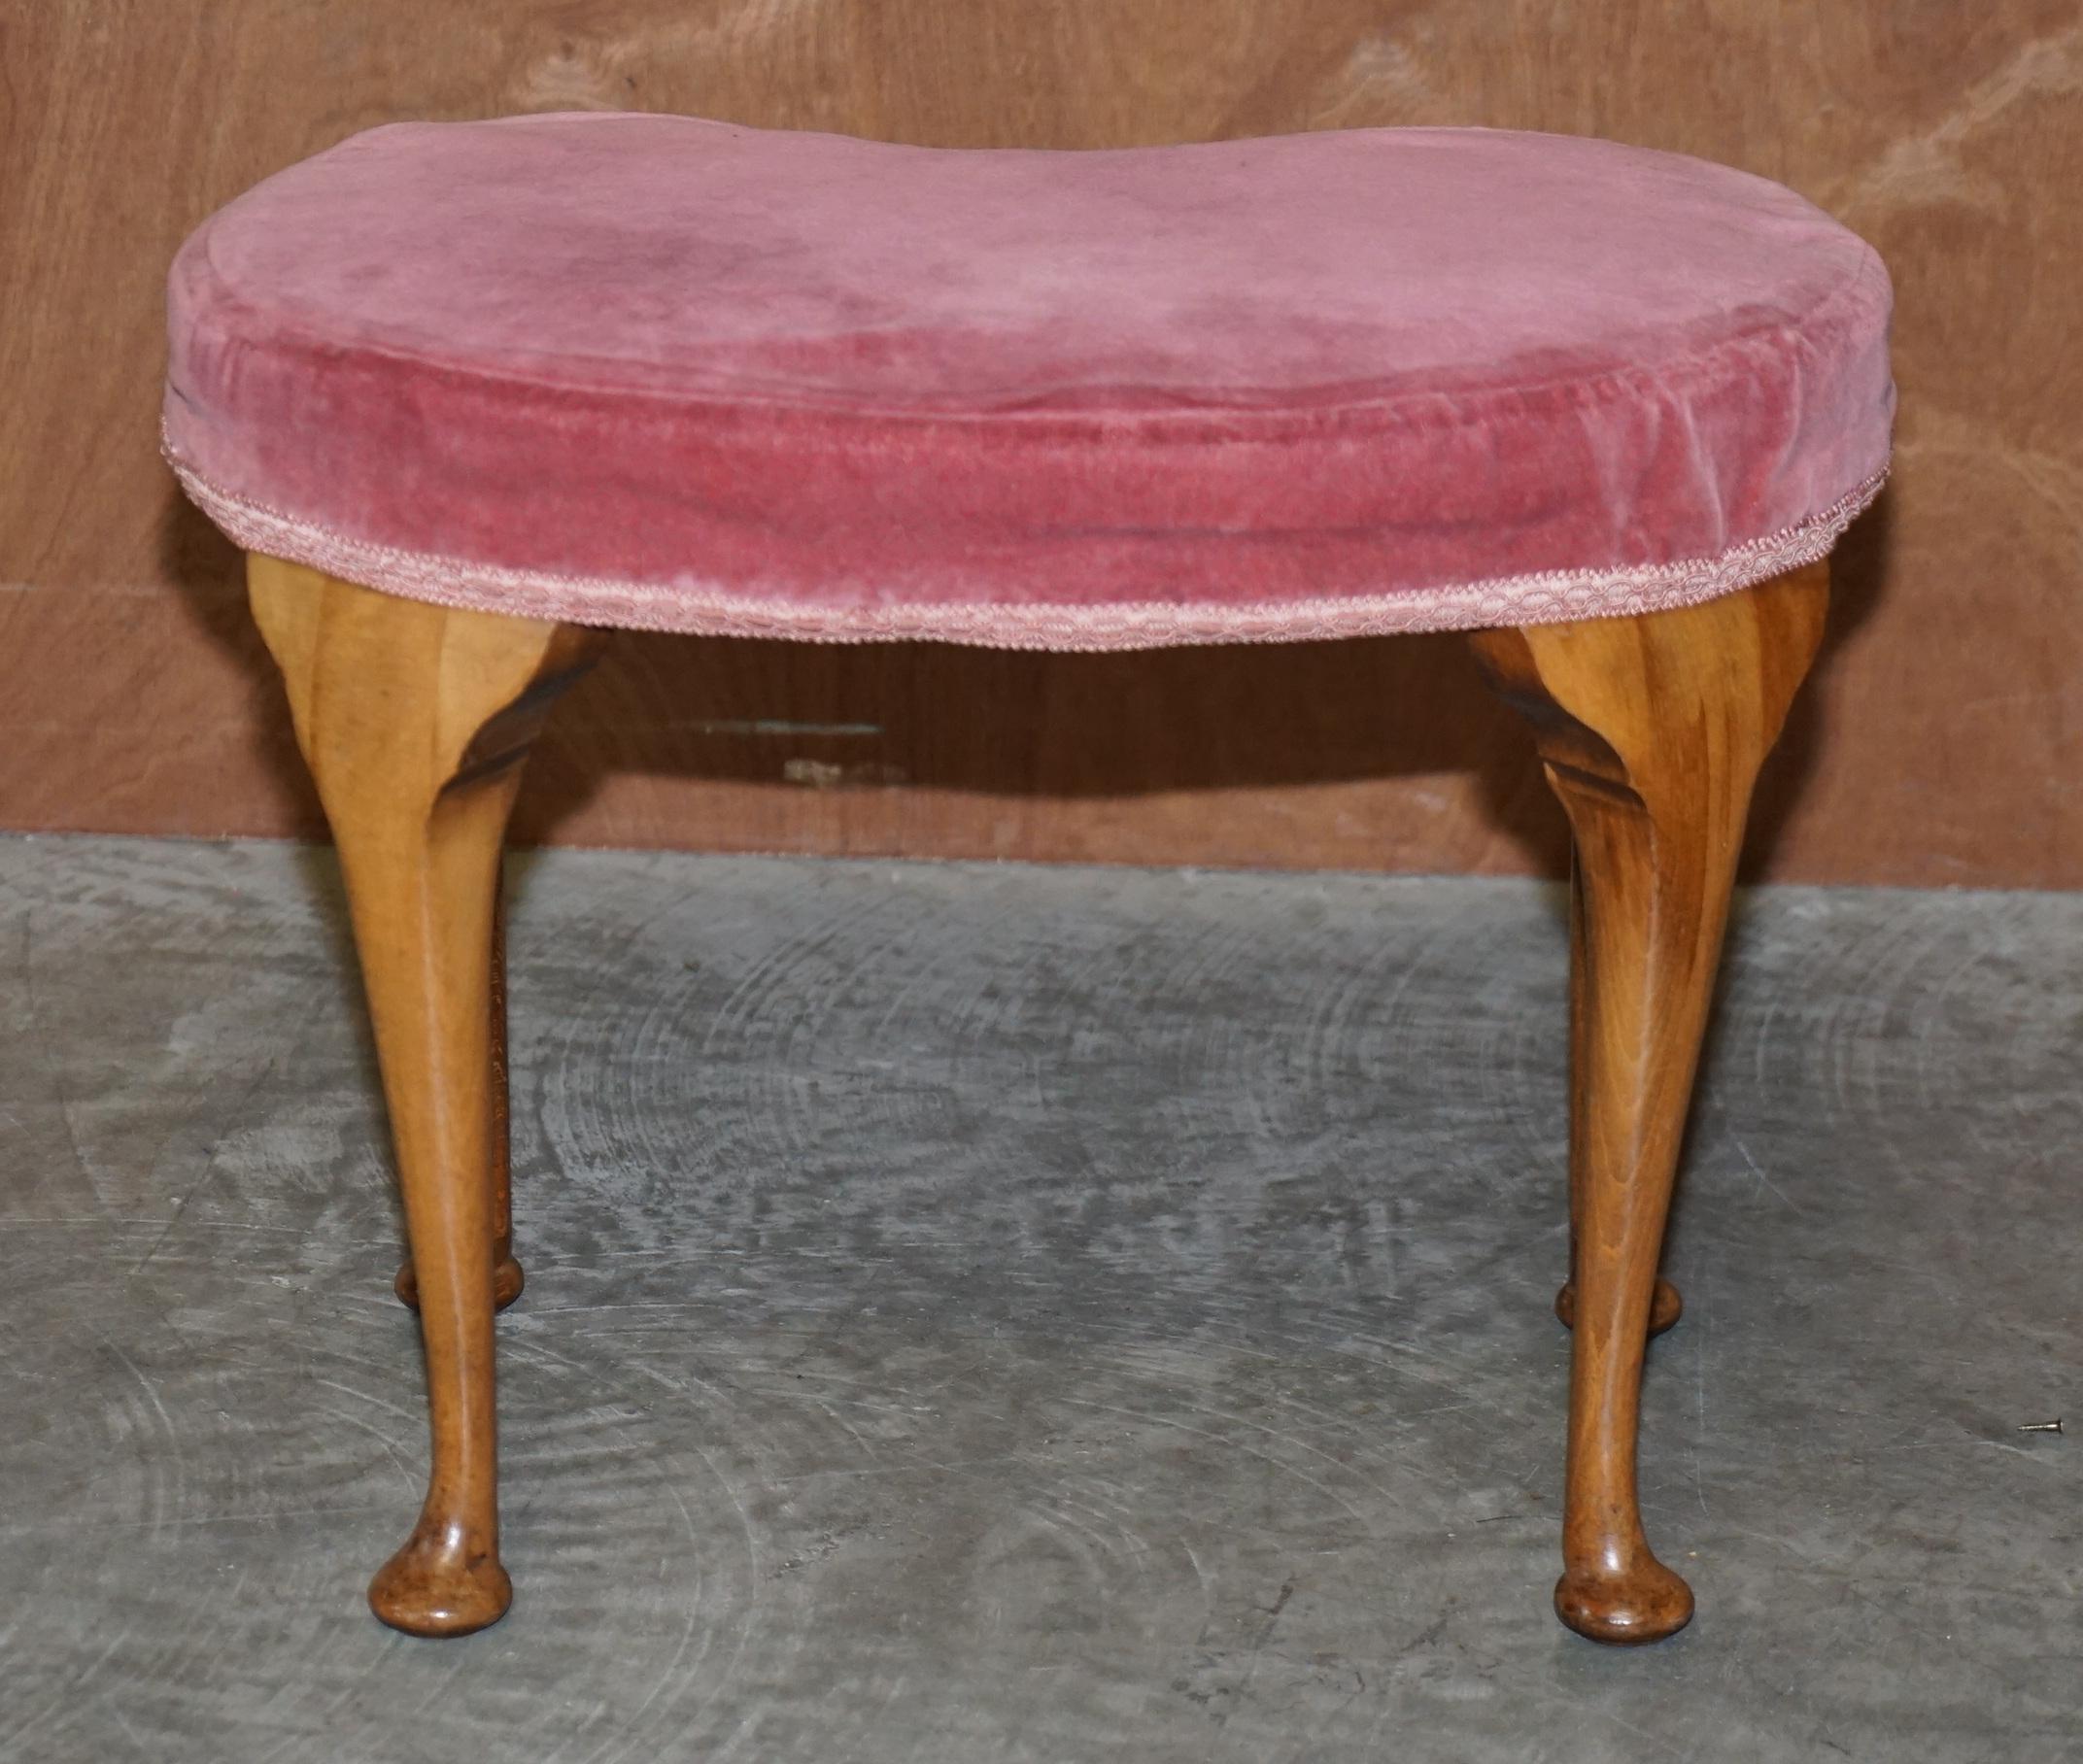 Upholstery Art Deco circa 1920 Antique Kidney Bean Shaped Dressing Table Stool Lovely Wood